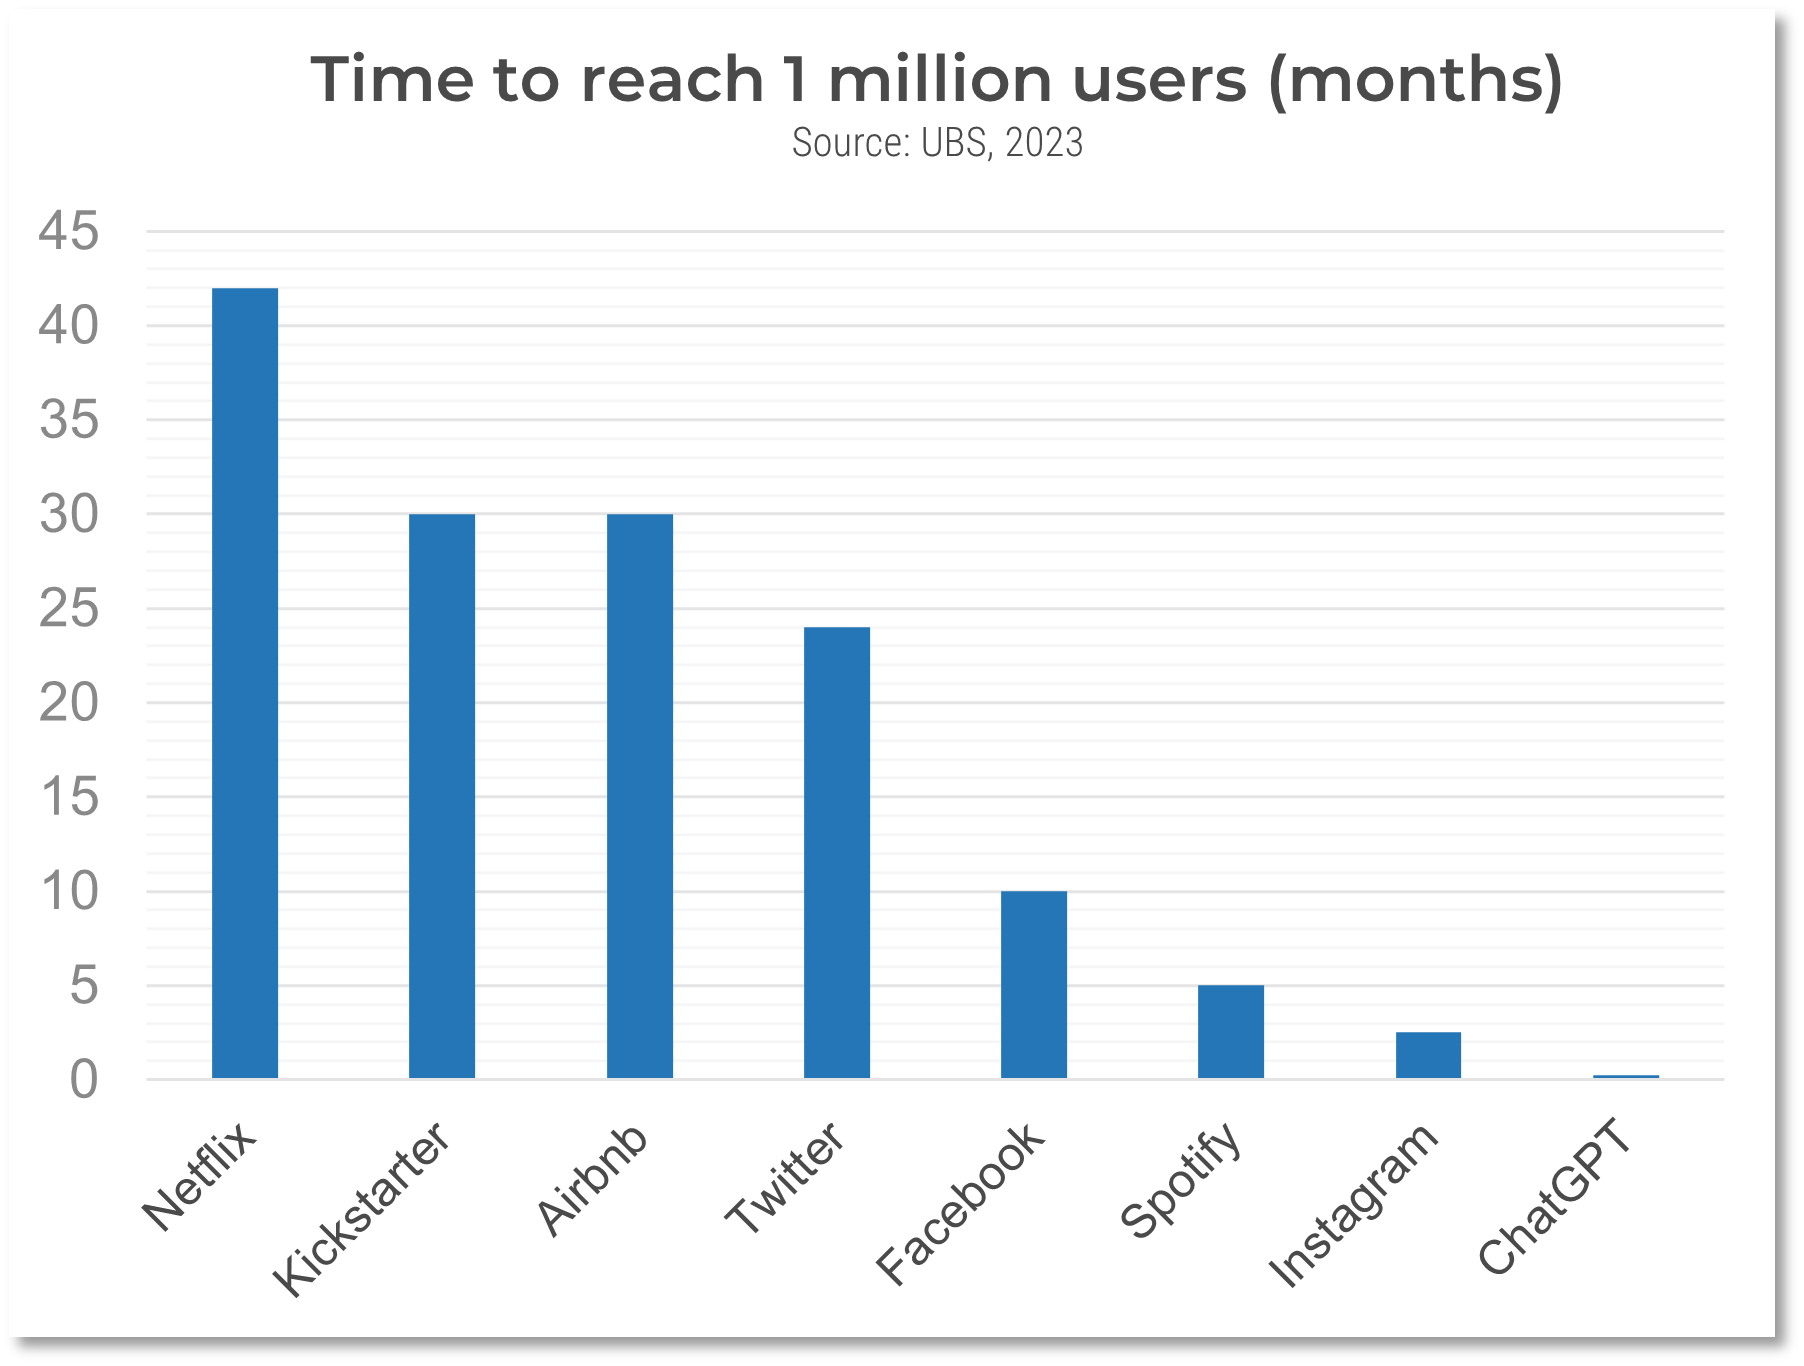 The image contains a graph that demonstrates time to reach 1 million users.